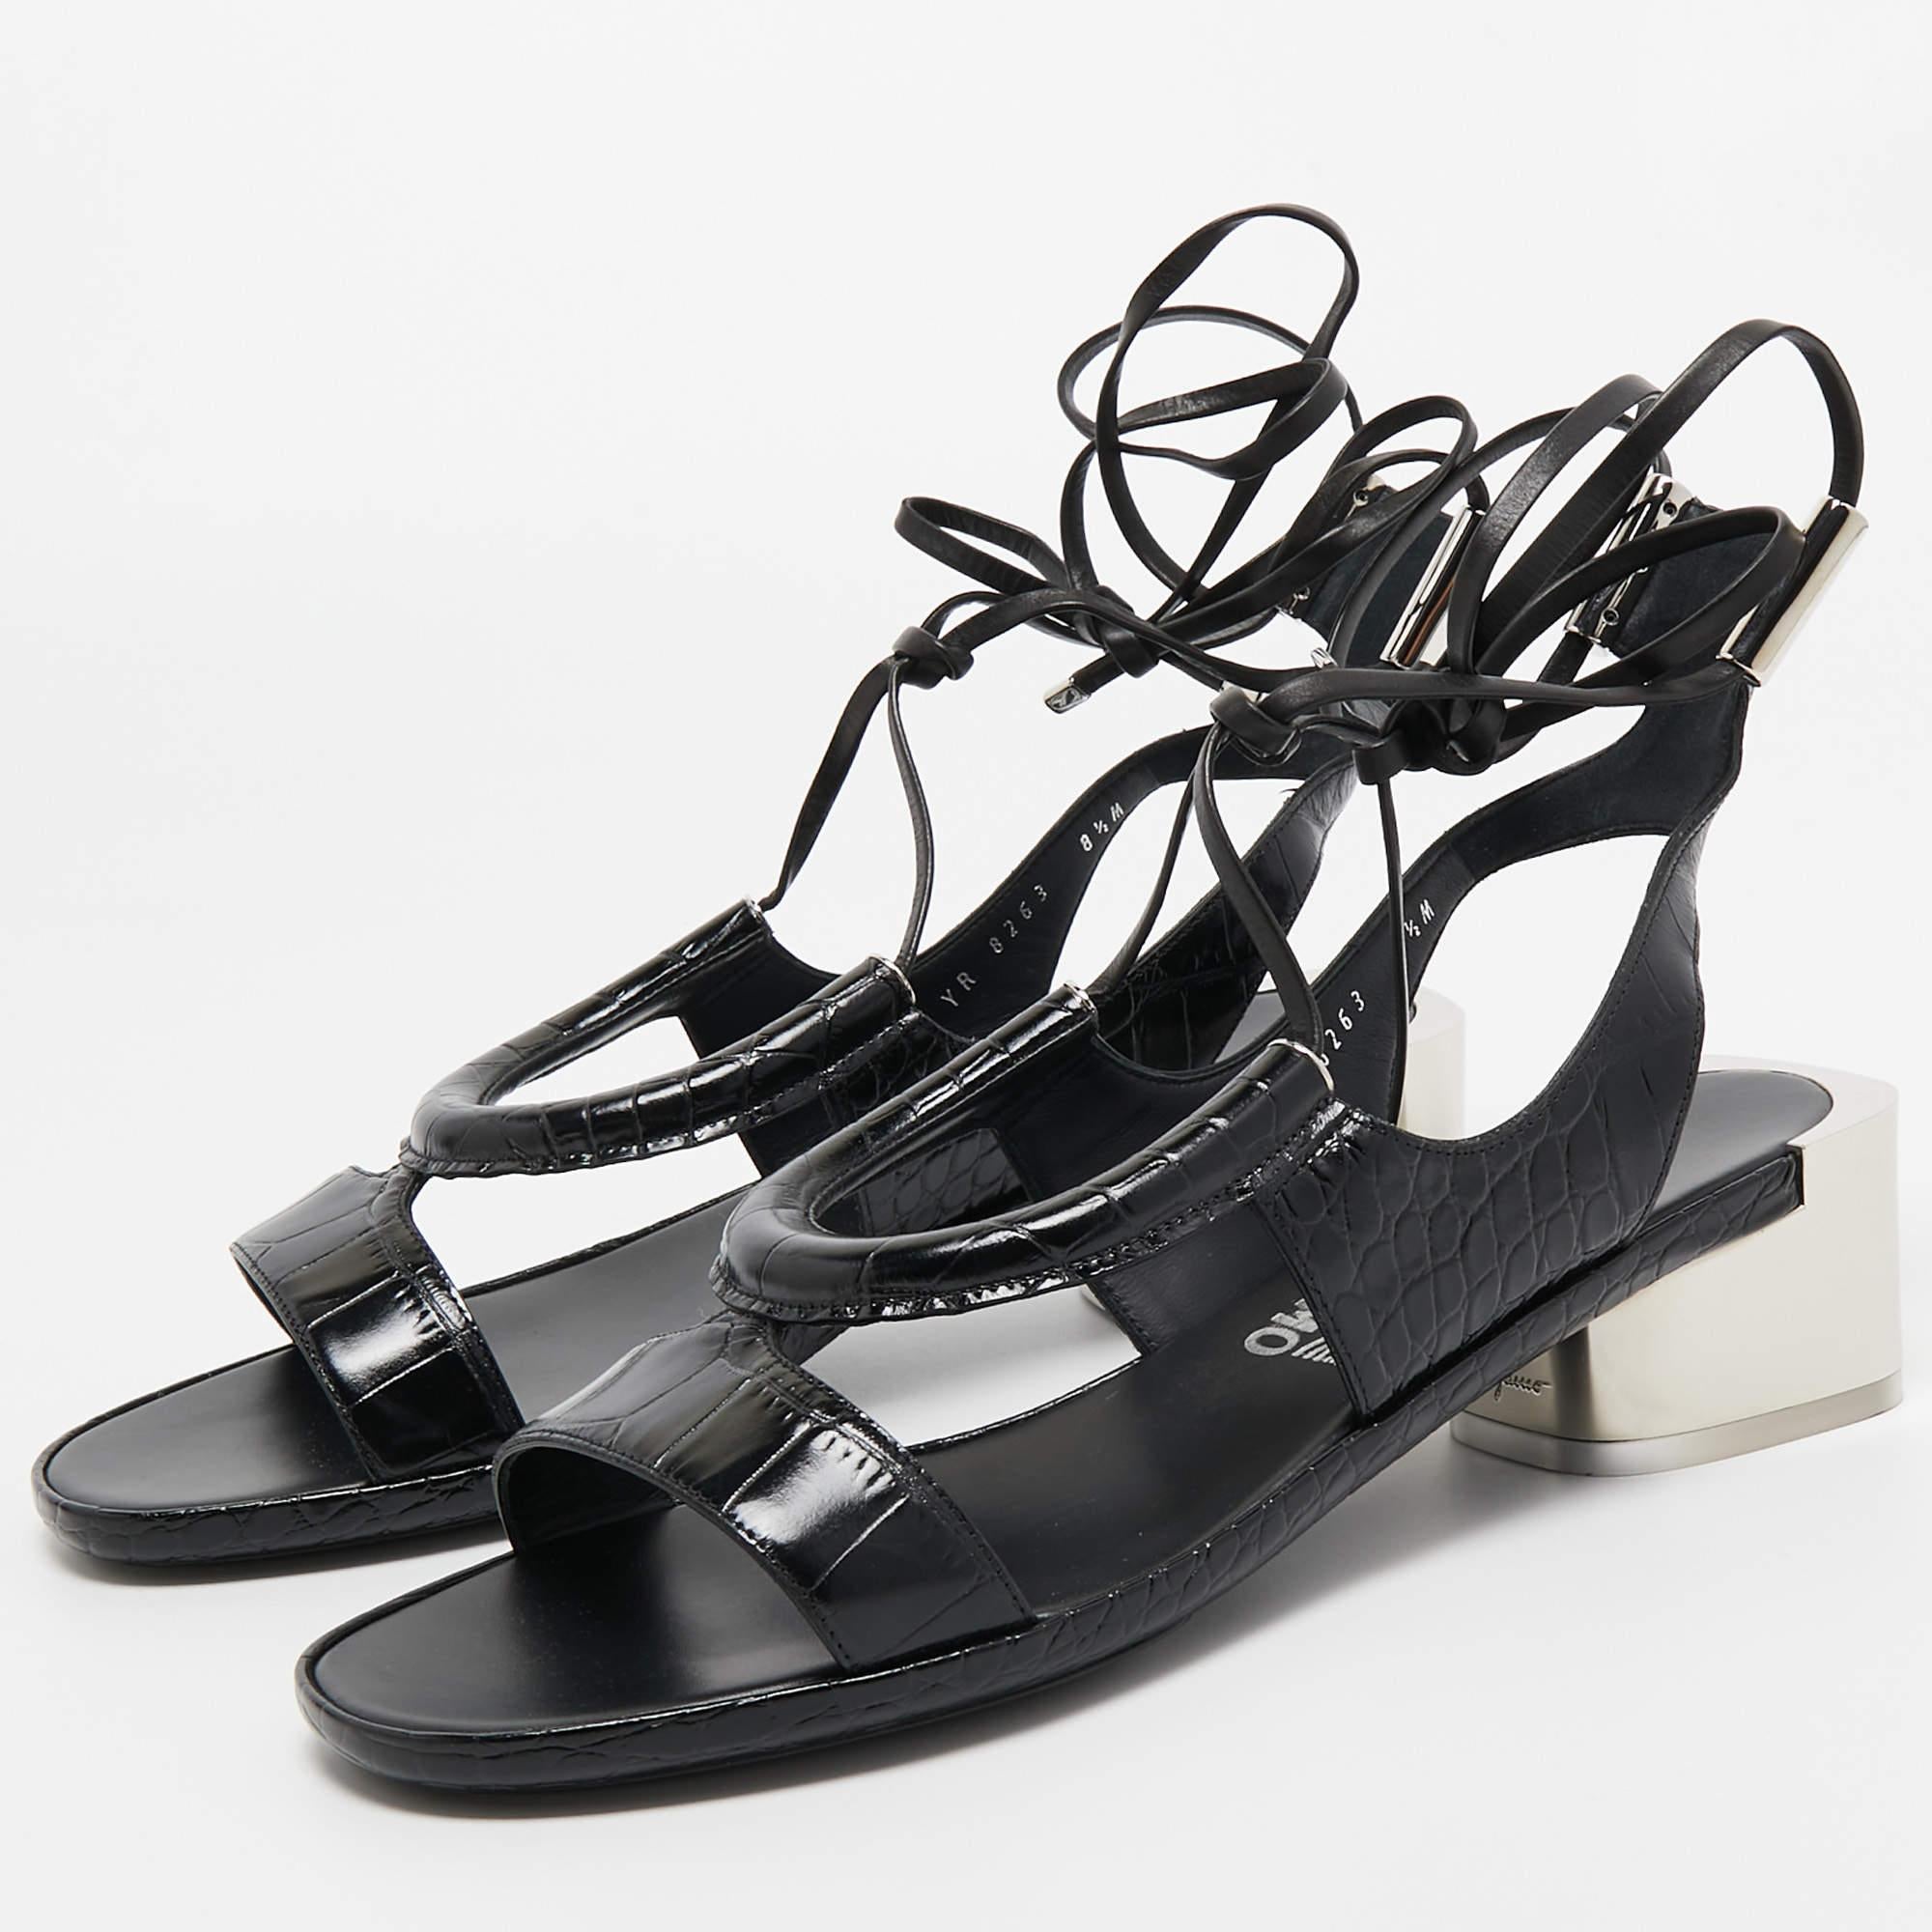 The fashion house’s tradition of excellence, coupled with modern design sensibilities, works to make these Salvatore Ferragamo sandals a fabulous choice. They'll help you deliver a chic look with ease.

